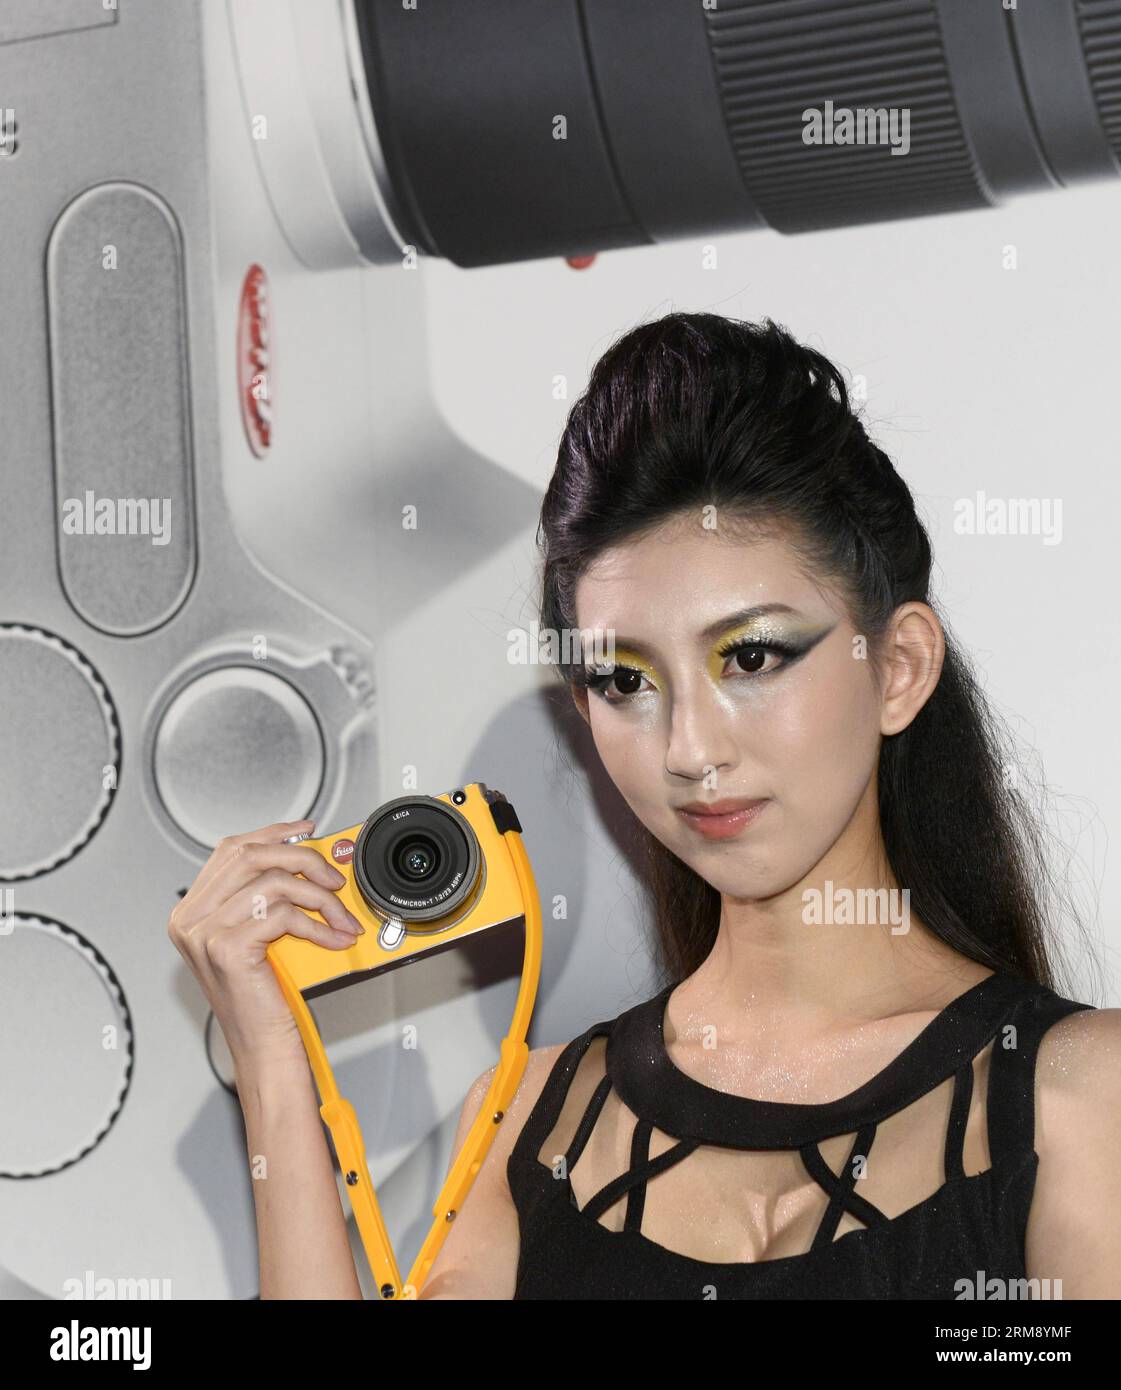 (140430) -- TAIPEI, April 30, 2014 (Xinhua) -- A model demonstrates a brand-new Leica T camera at a release ceremony in Taipei, southeast China s Taiwan, April 30, 2014. German camera manufacturer Leica released its latest T system cameras Wednesday at the Songshan Cultural Park in Taipei. The Leica T system features a 16.3-megapixel APS-C CMOS sensor in a minimalist design and supports wireless transmission of photographic works to users mobile devices and social networks. (Xinhua/Huang Xiaoyong) (lmm) CHINA-TAIPEI-CAMERA-LEICA T SYSTEM-RELEASE (CN) PUBLICATIONxNOTxINxCHN   Taipei April 30 20 Stock Photo